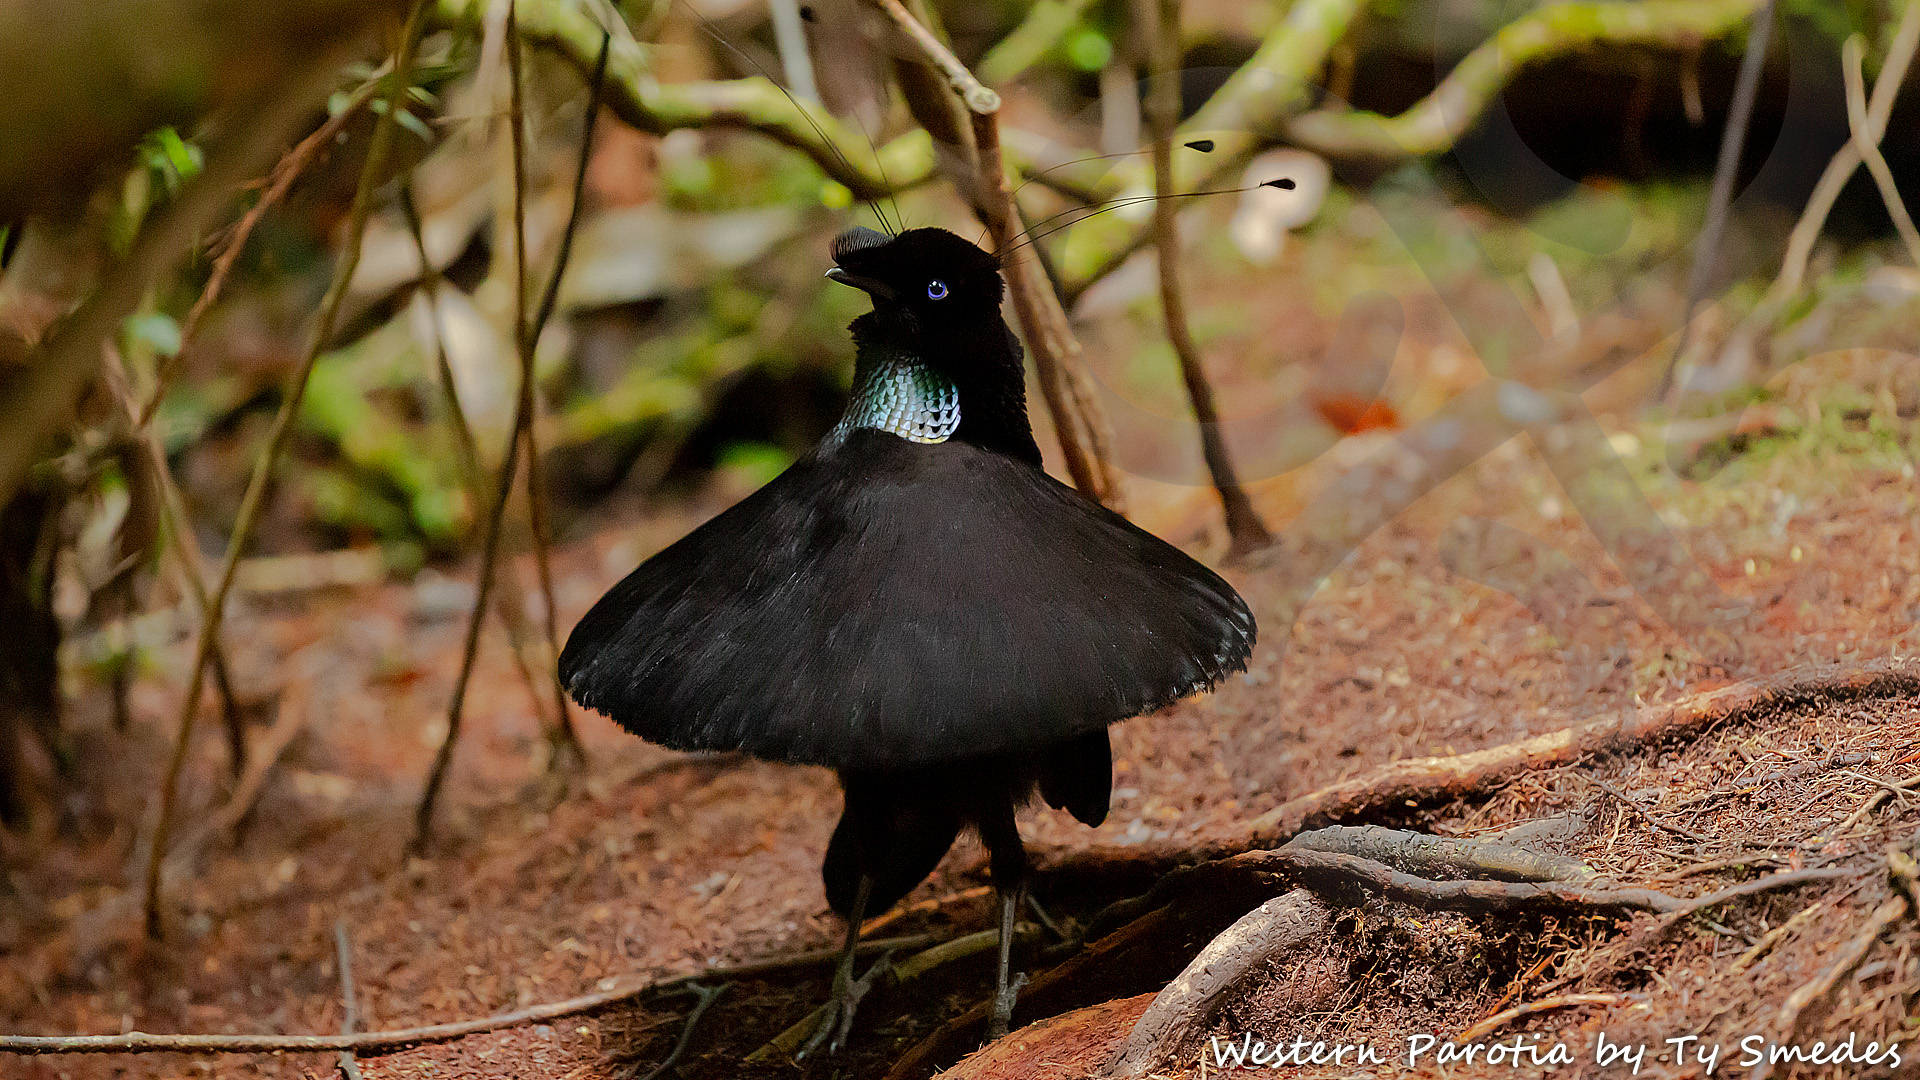 The ballerina-display of the adult male Western Parotia Parotia sefilata on its meticulously cleared ground court has to be witnessed to be believed. This amazing bird-of-paradise is but one of 65 bird species endemic to West Papua, where it occurs at mid-elevations in the Arfak, Tamrau and Wandammen Mountains. Copyright © Ty Smedes